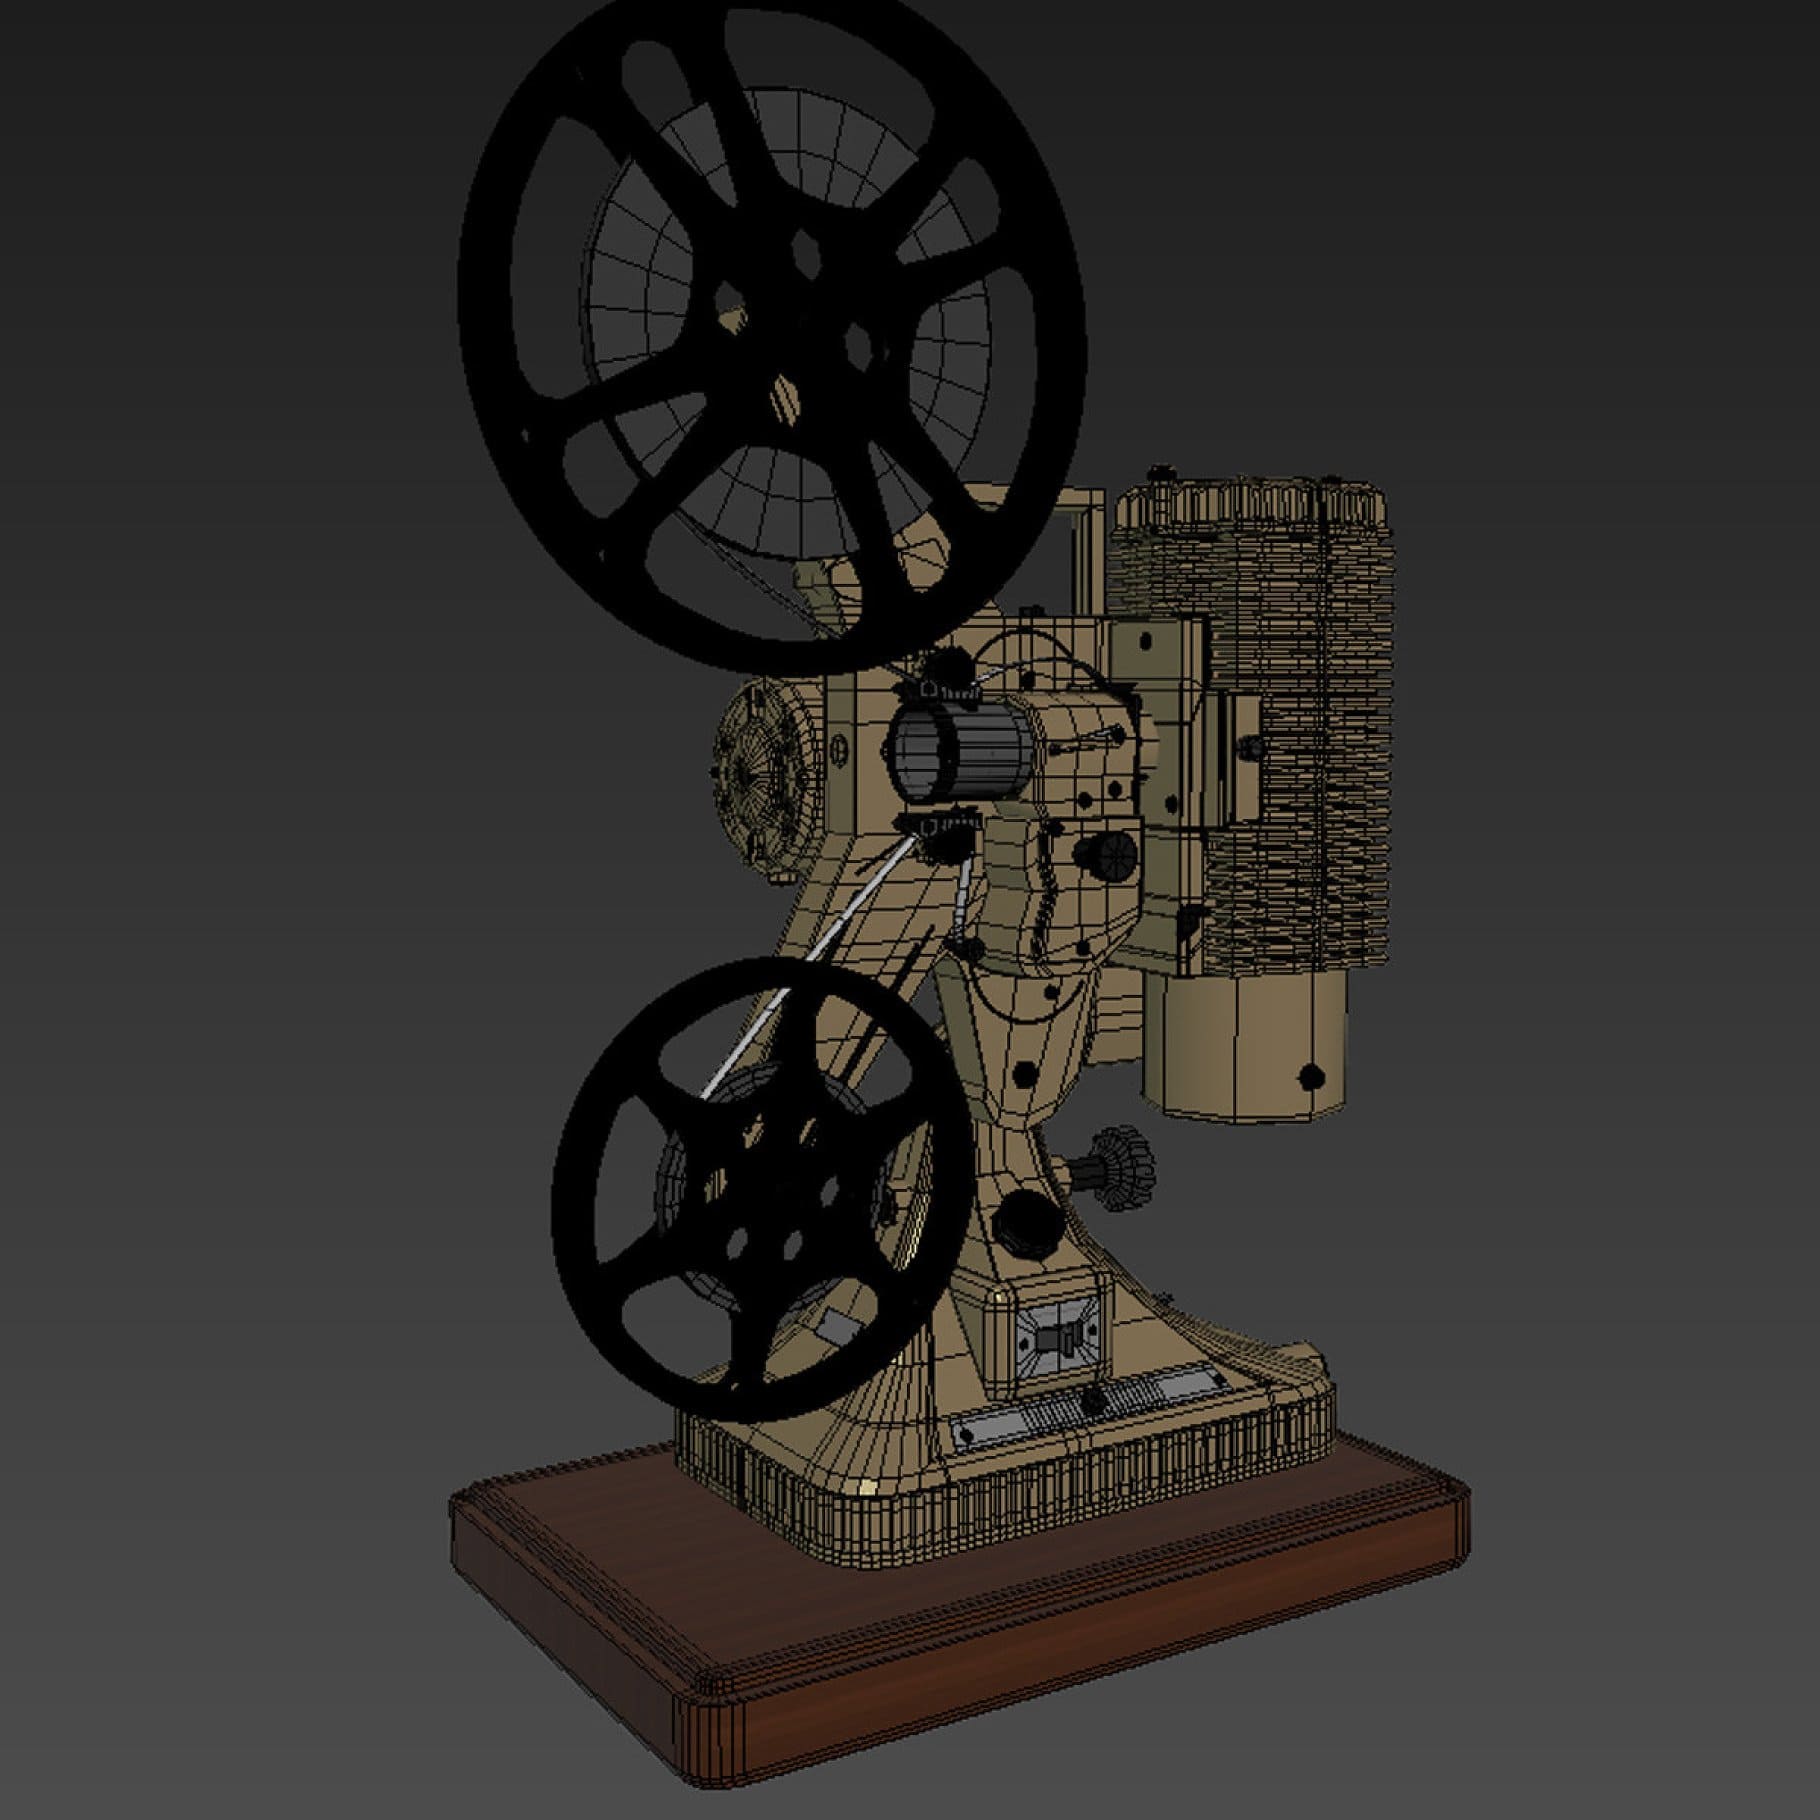 3D model of a projector with black cassettes for rewinding the film.